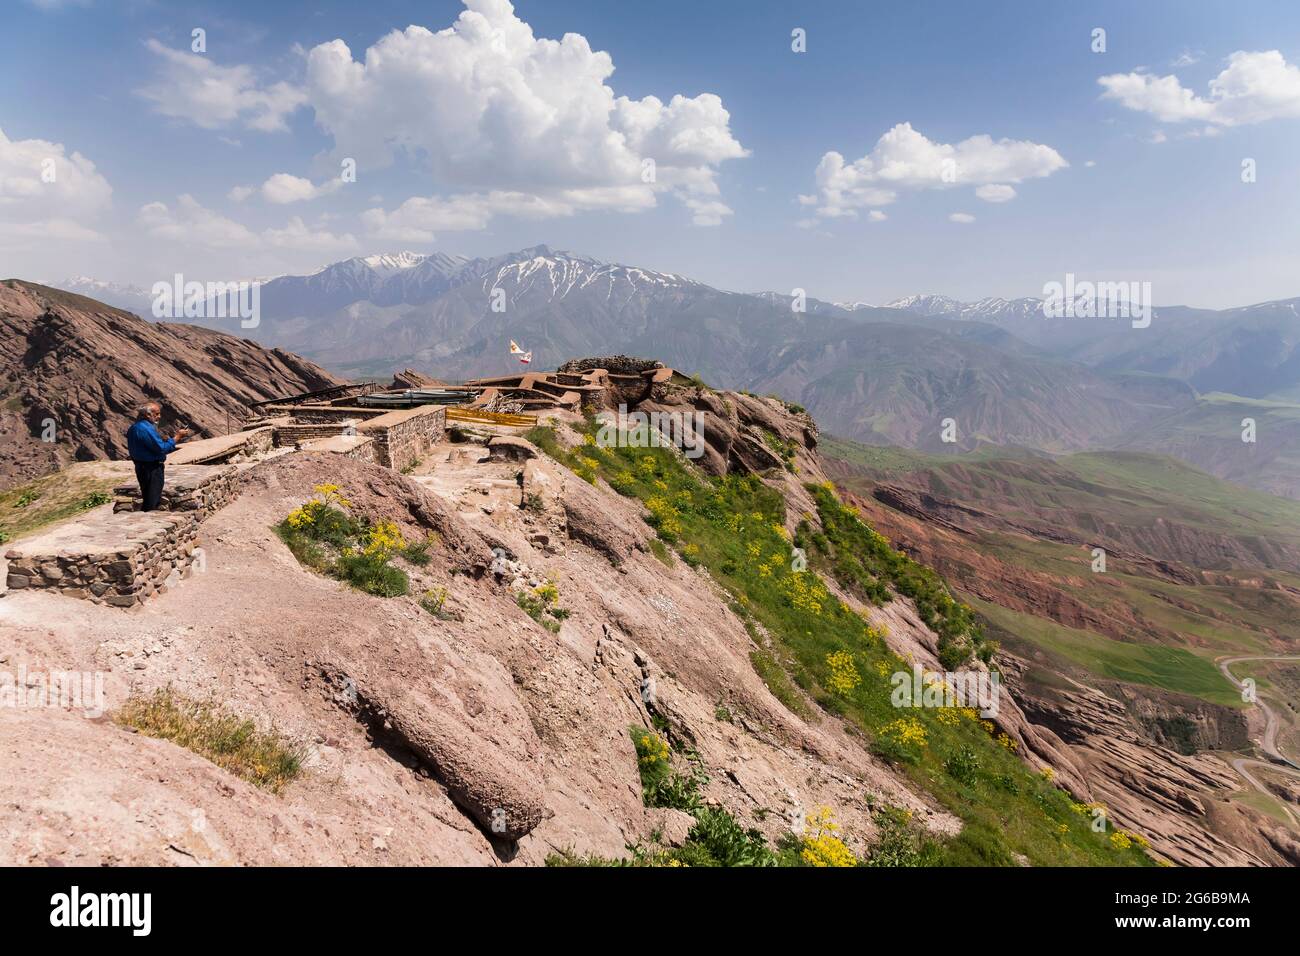 Alamut Castle, archaeological site on steep hilltop, Alamut, Qazvin Province, Iran, Persia, Western Asia, Asia Stock Photo